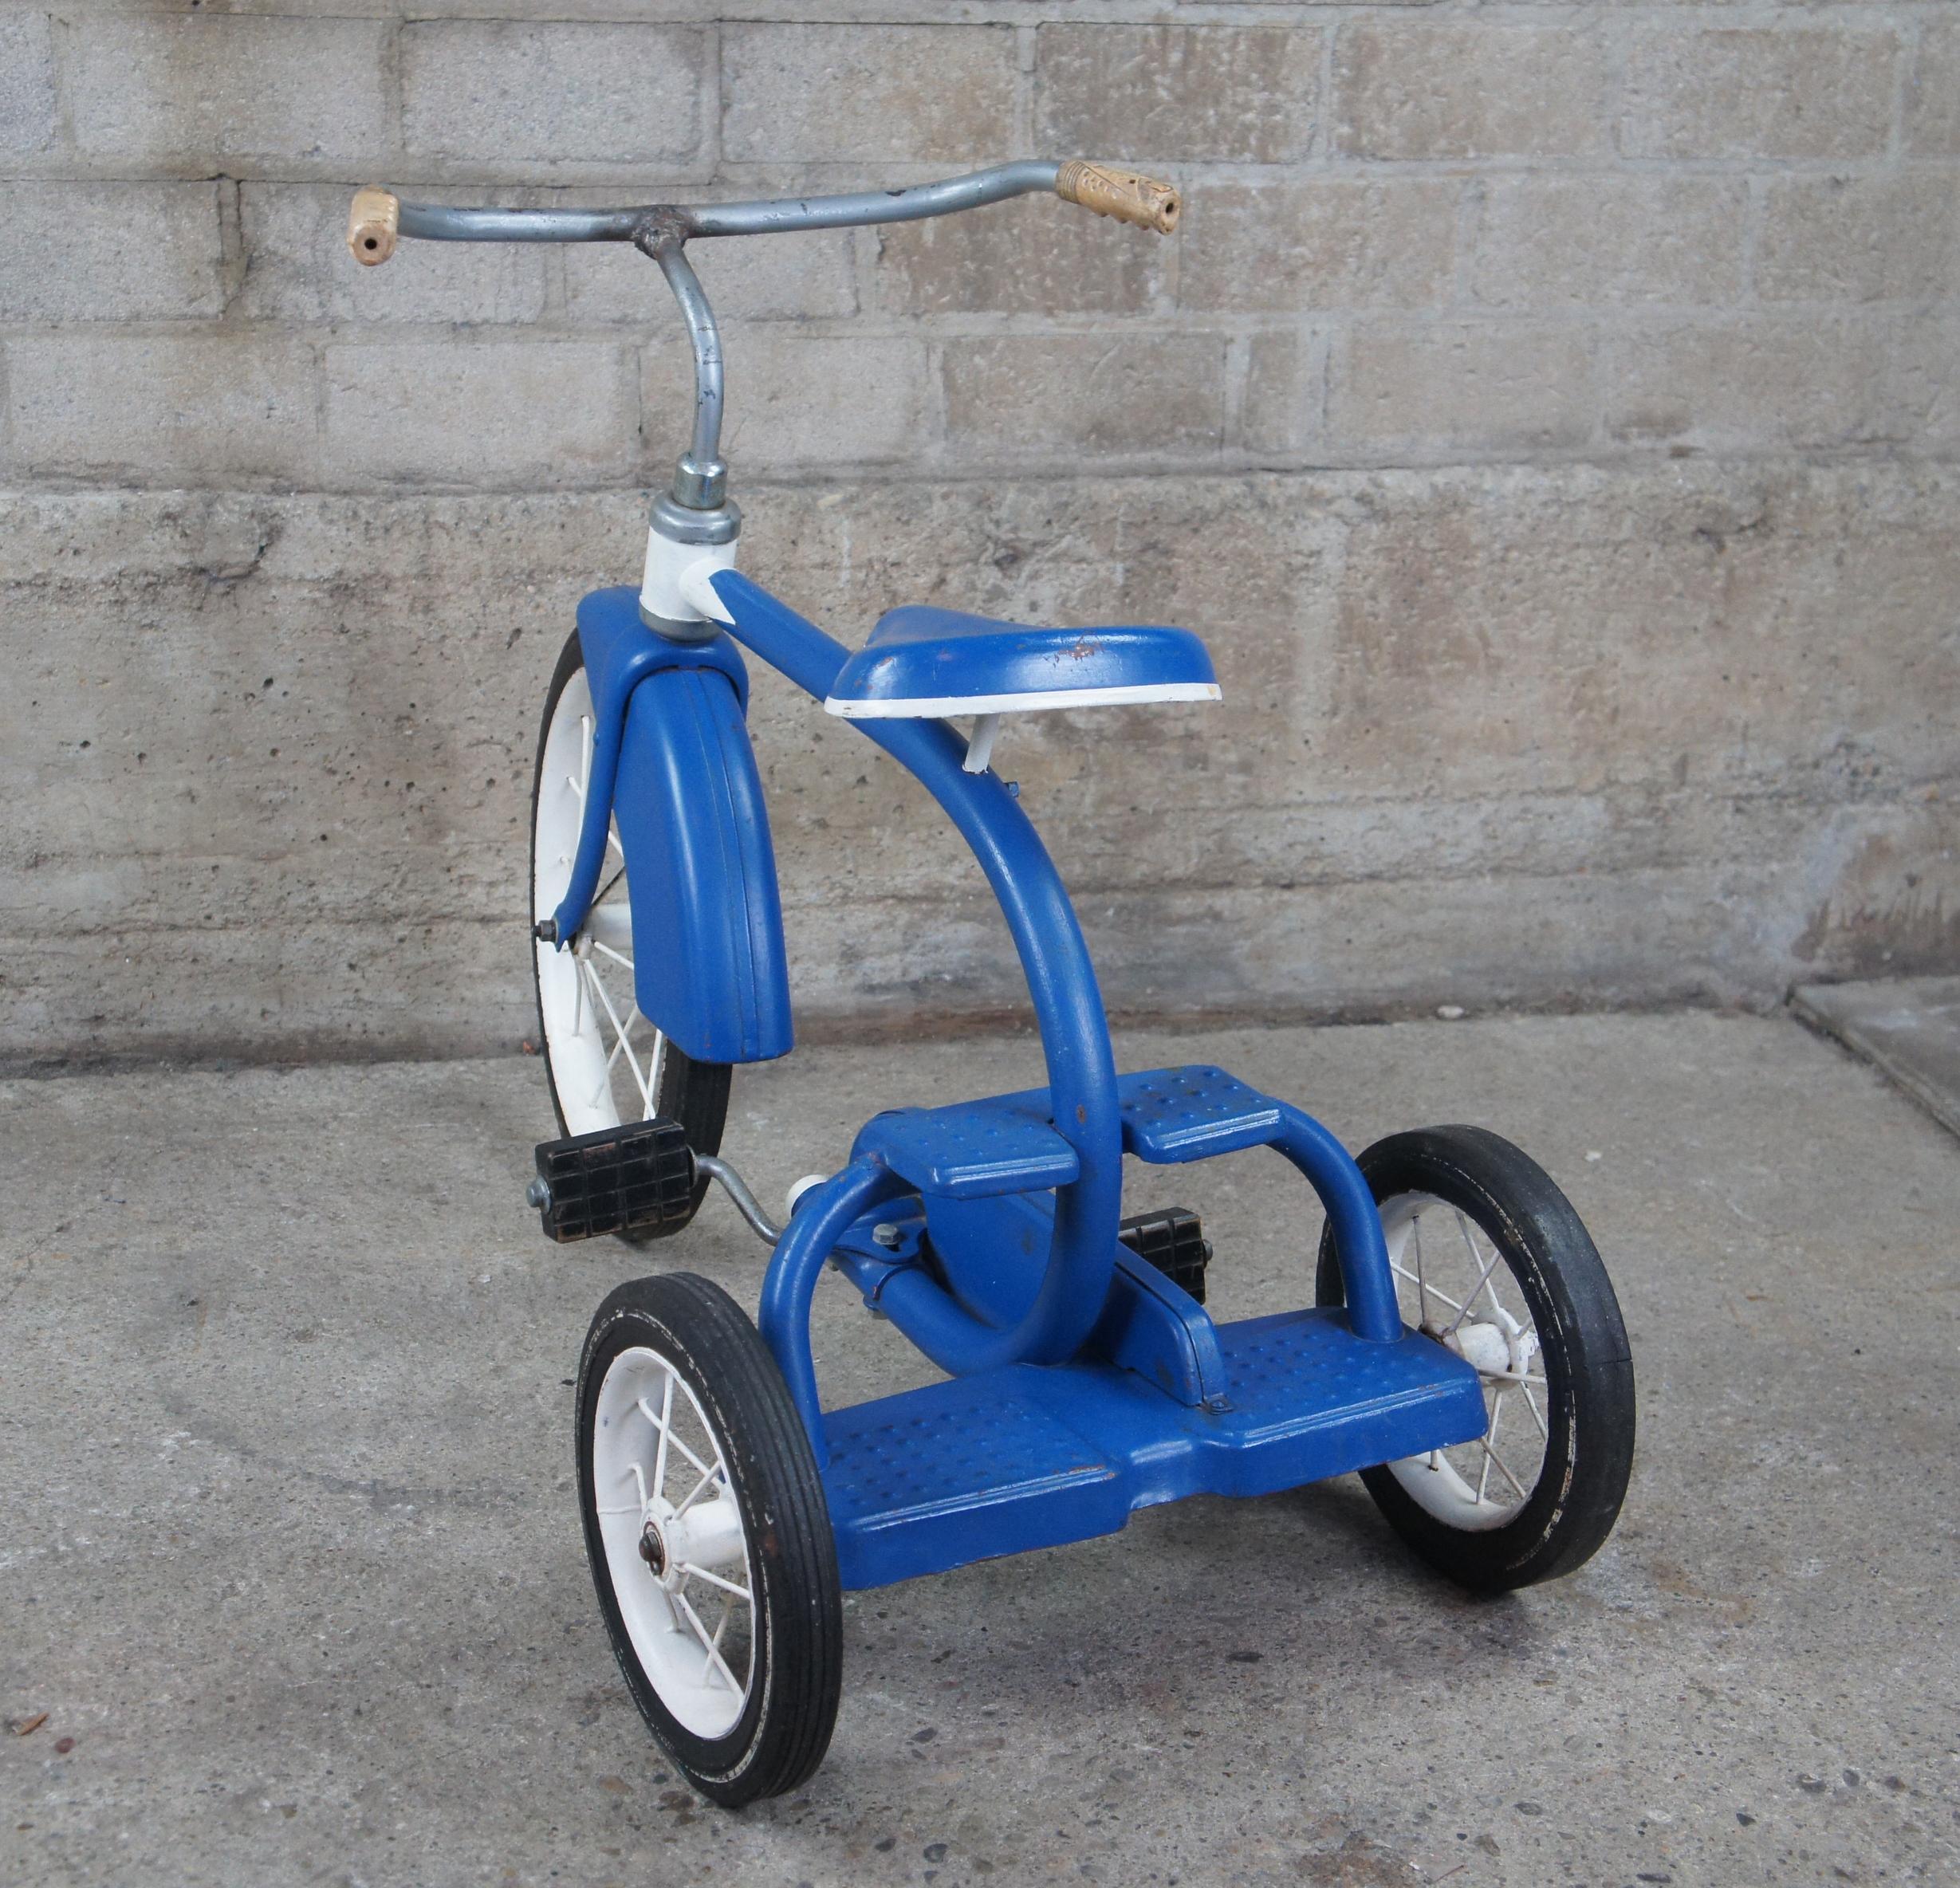 Mid-Century Modern 1960s Vintage Western Flyer Blue & White Childs Tricycle Pedal Bike Atomic